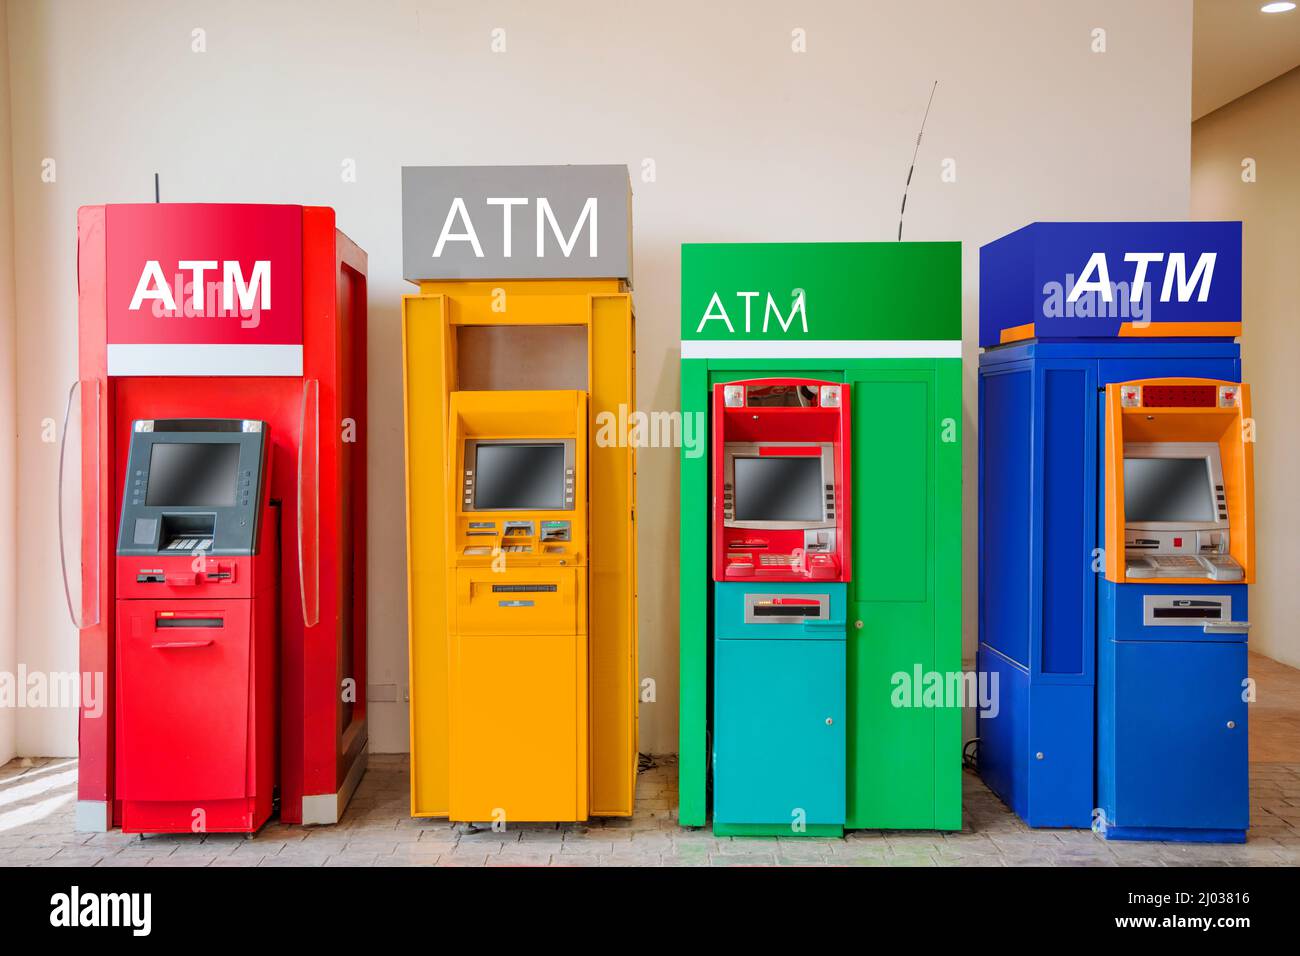 ATM machine banking cash money withdraw service at public place multiple bank. Stock Photo